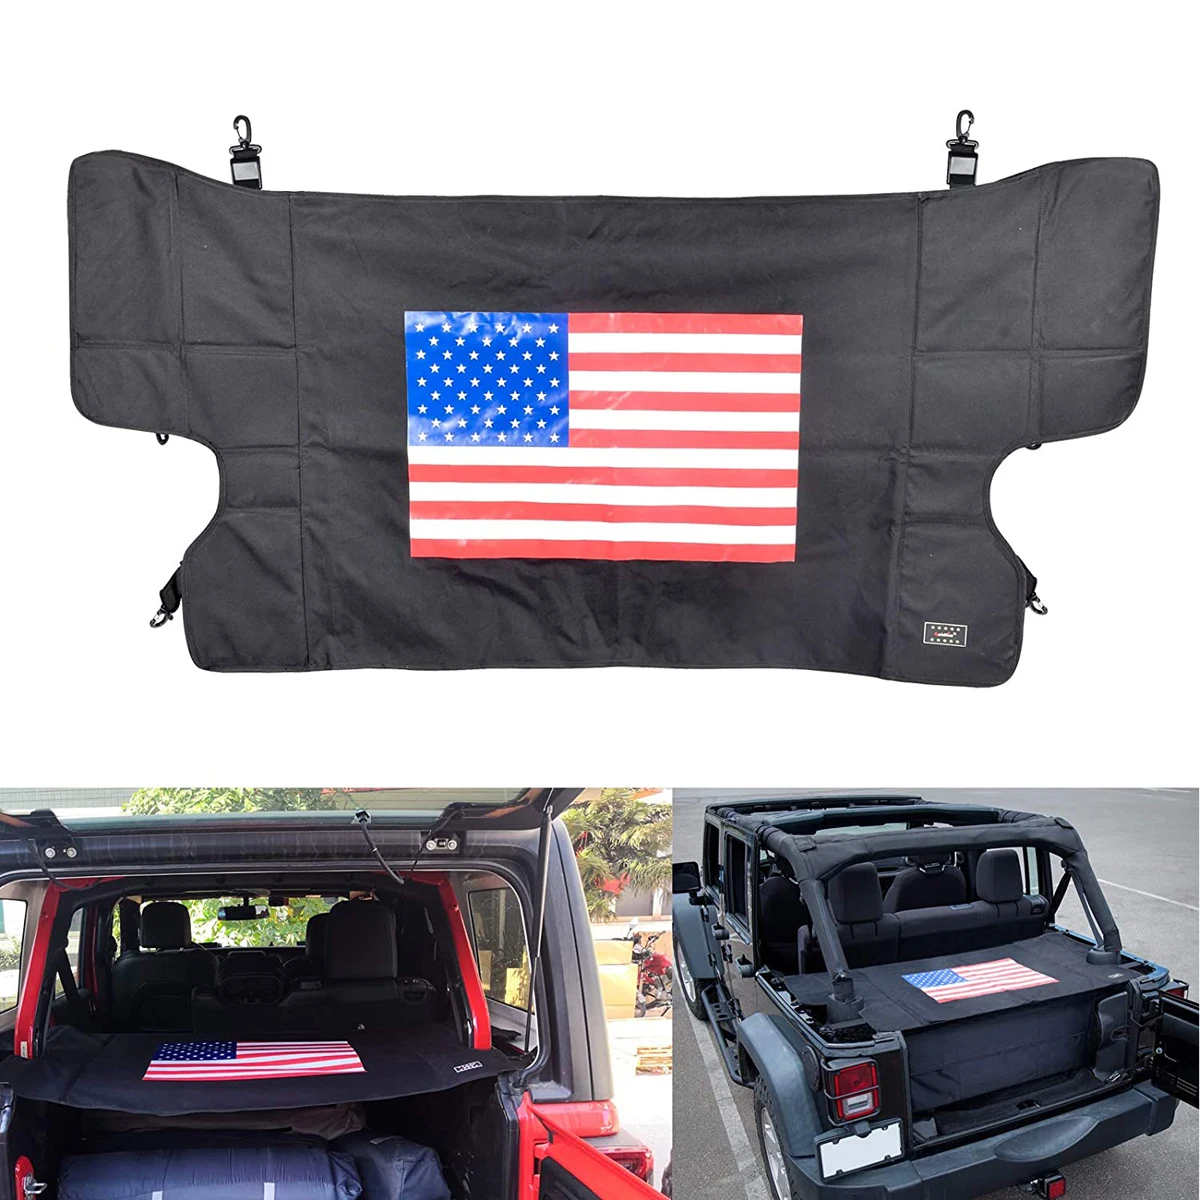 Trunk Cargo Cover Rear Trunk Cargo Luggage Security Shade Cover Protector Shield Compatible with Wrangler 2018-2020 JL USA Flag